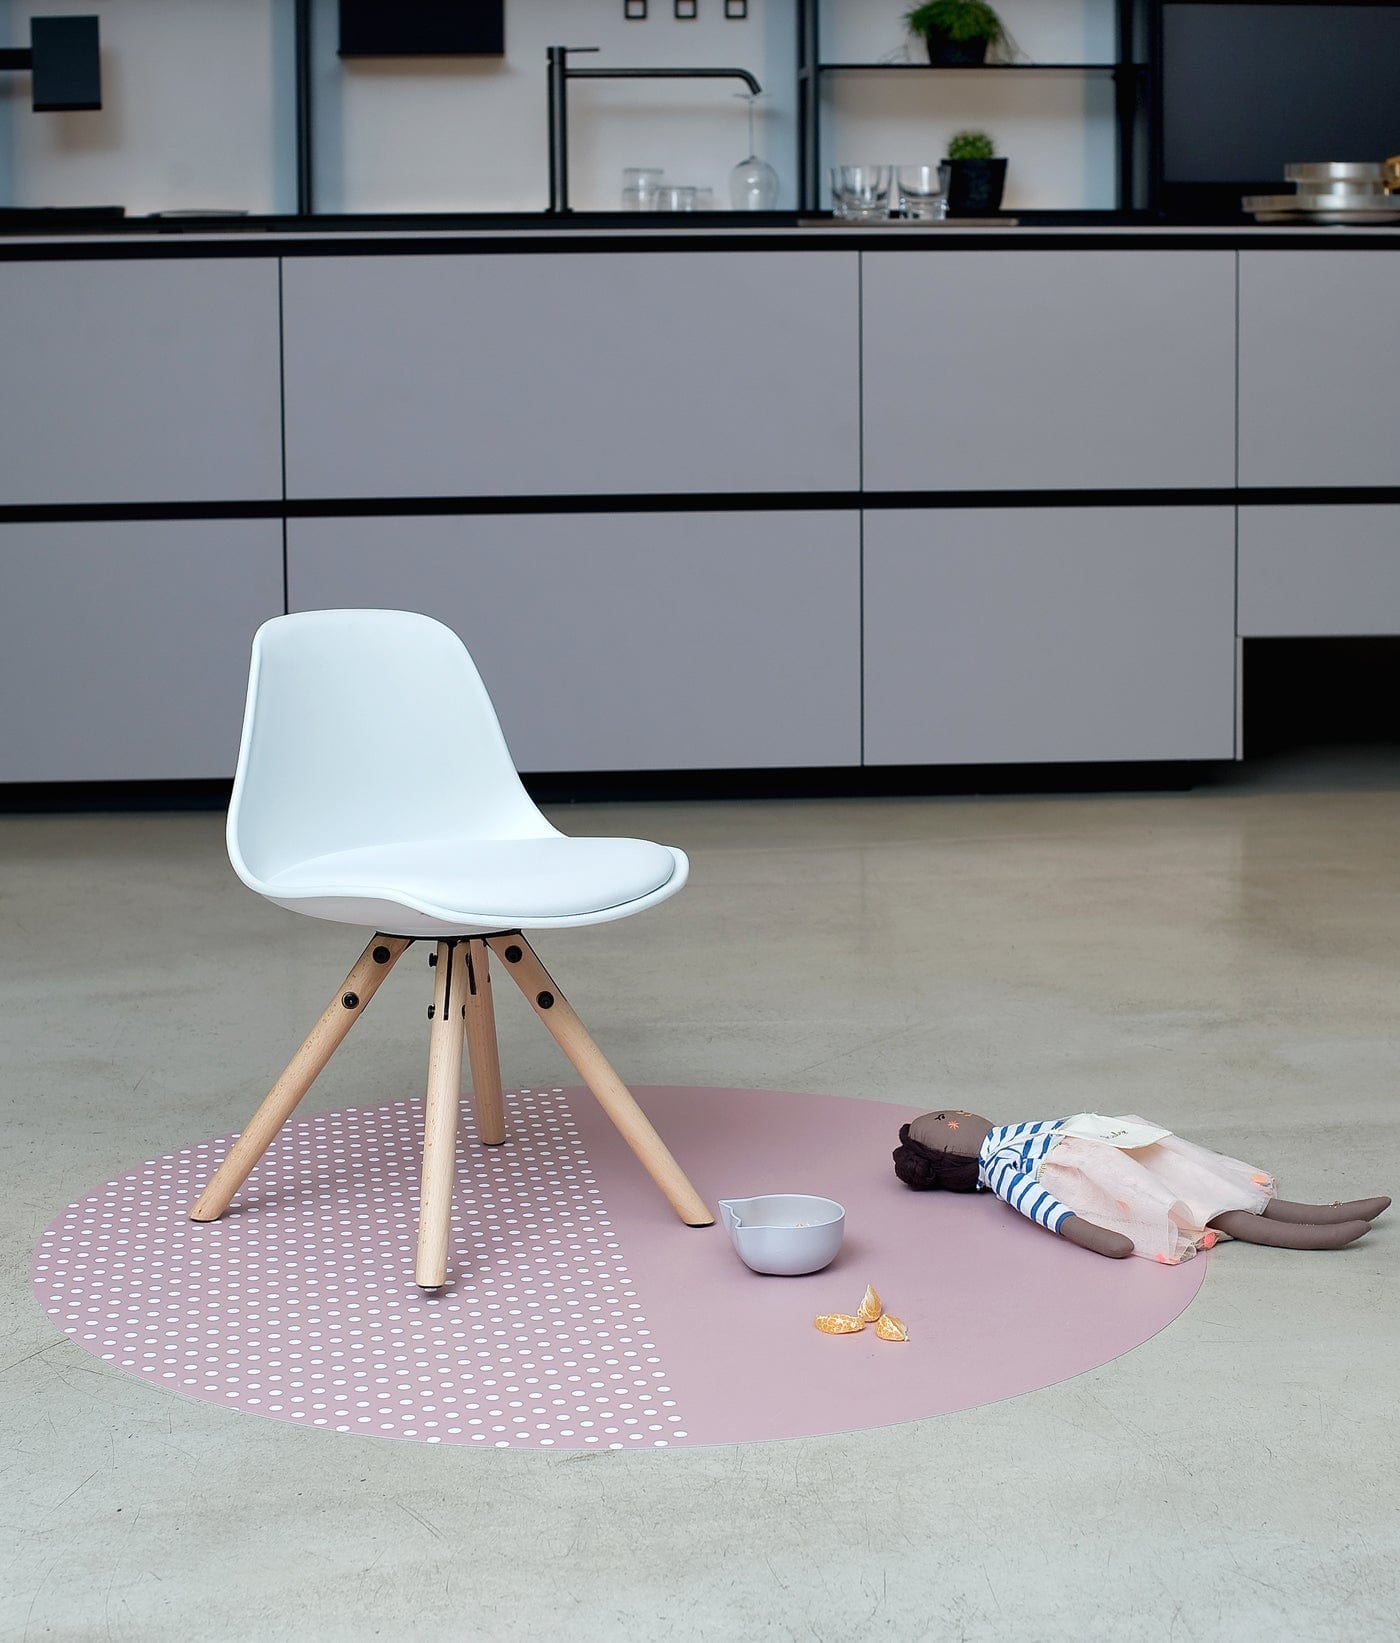 Prettier Splat Mats- Protect Your Floor During Meal Times